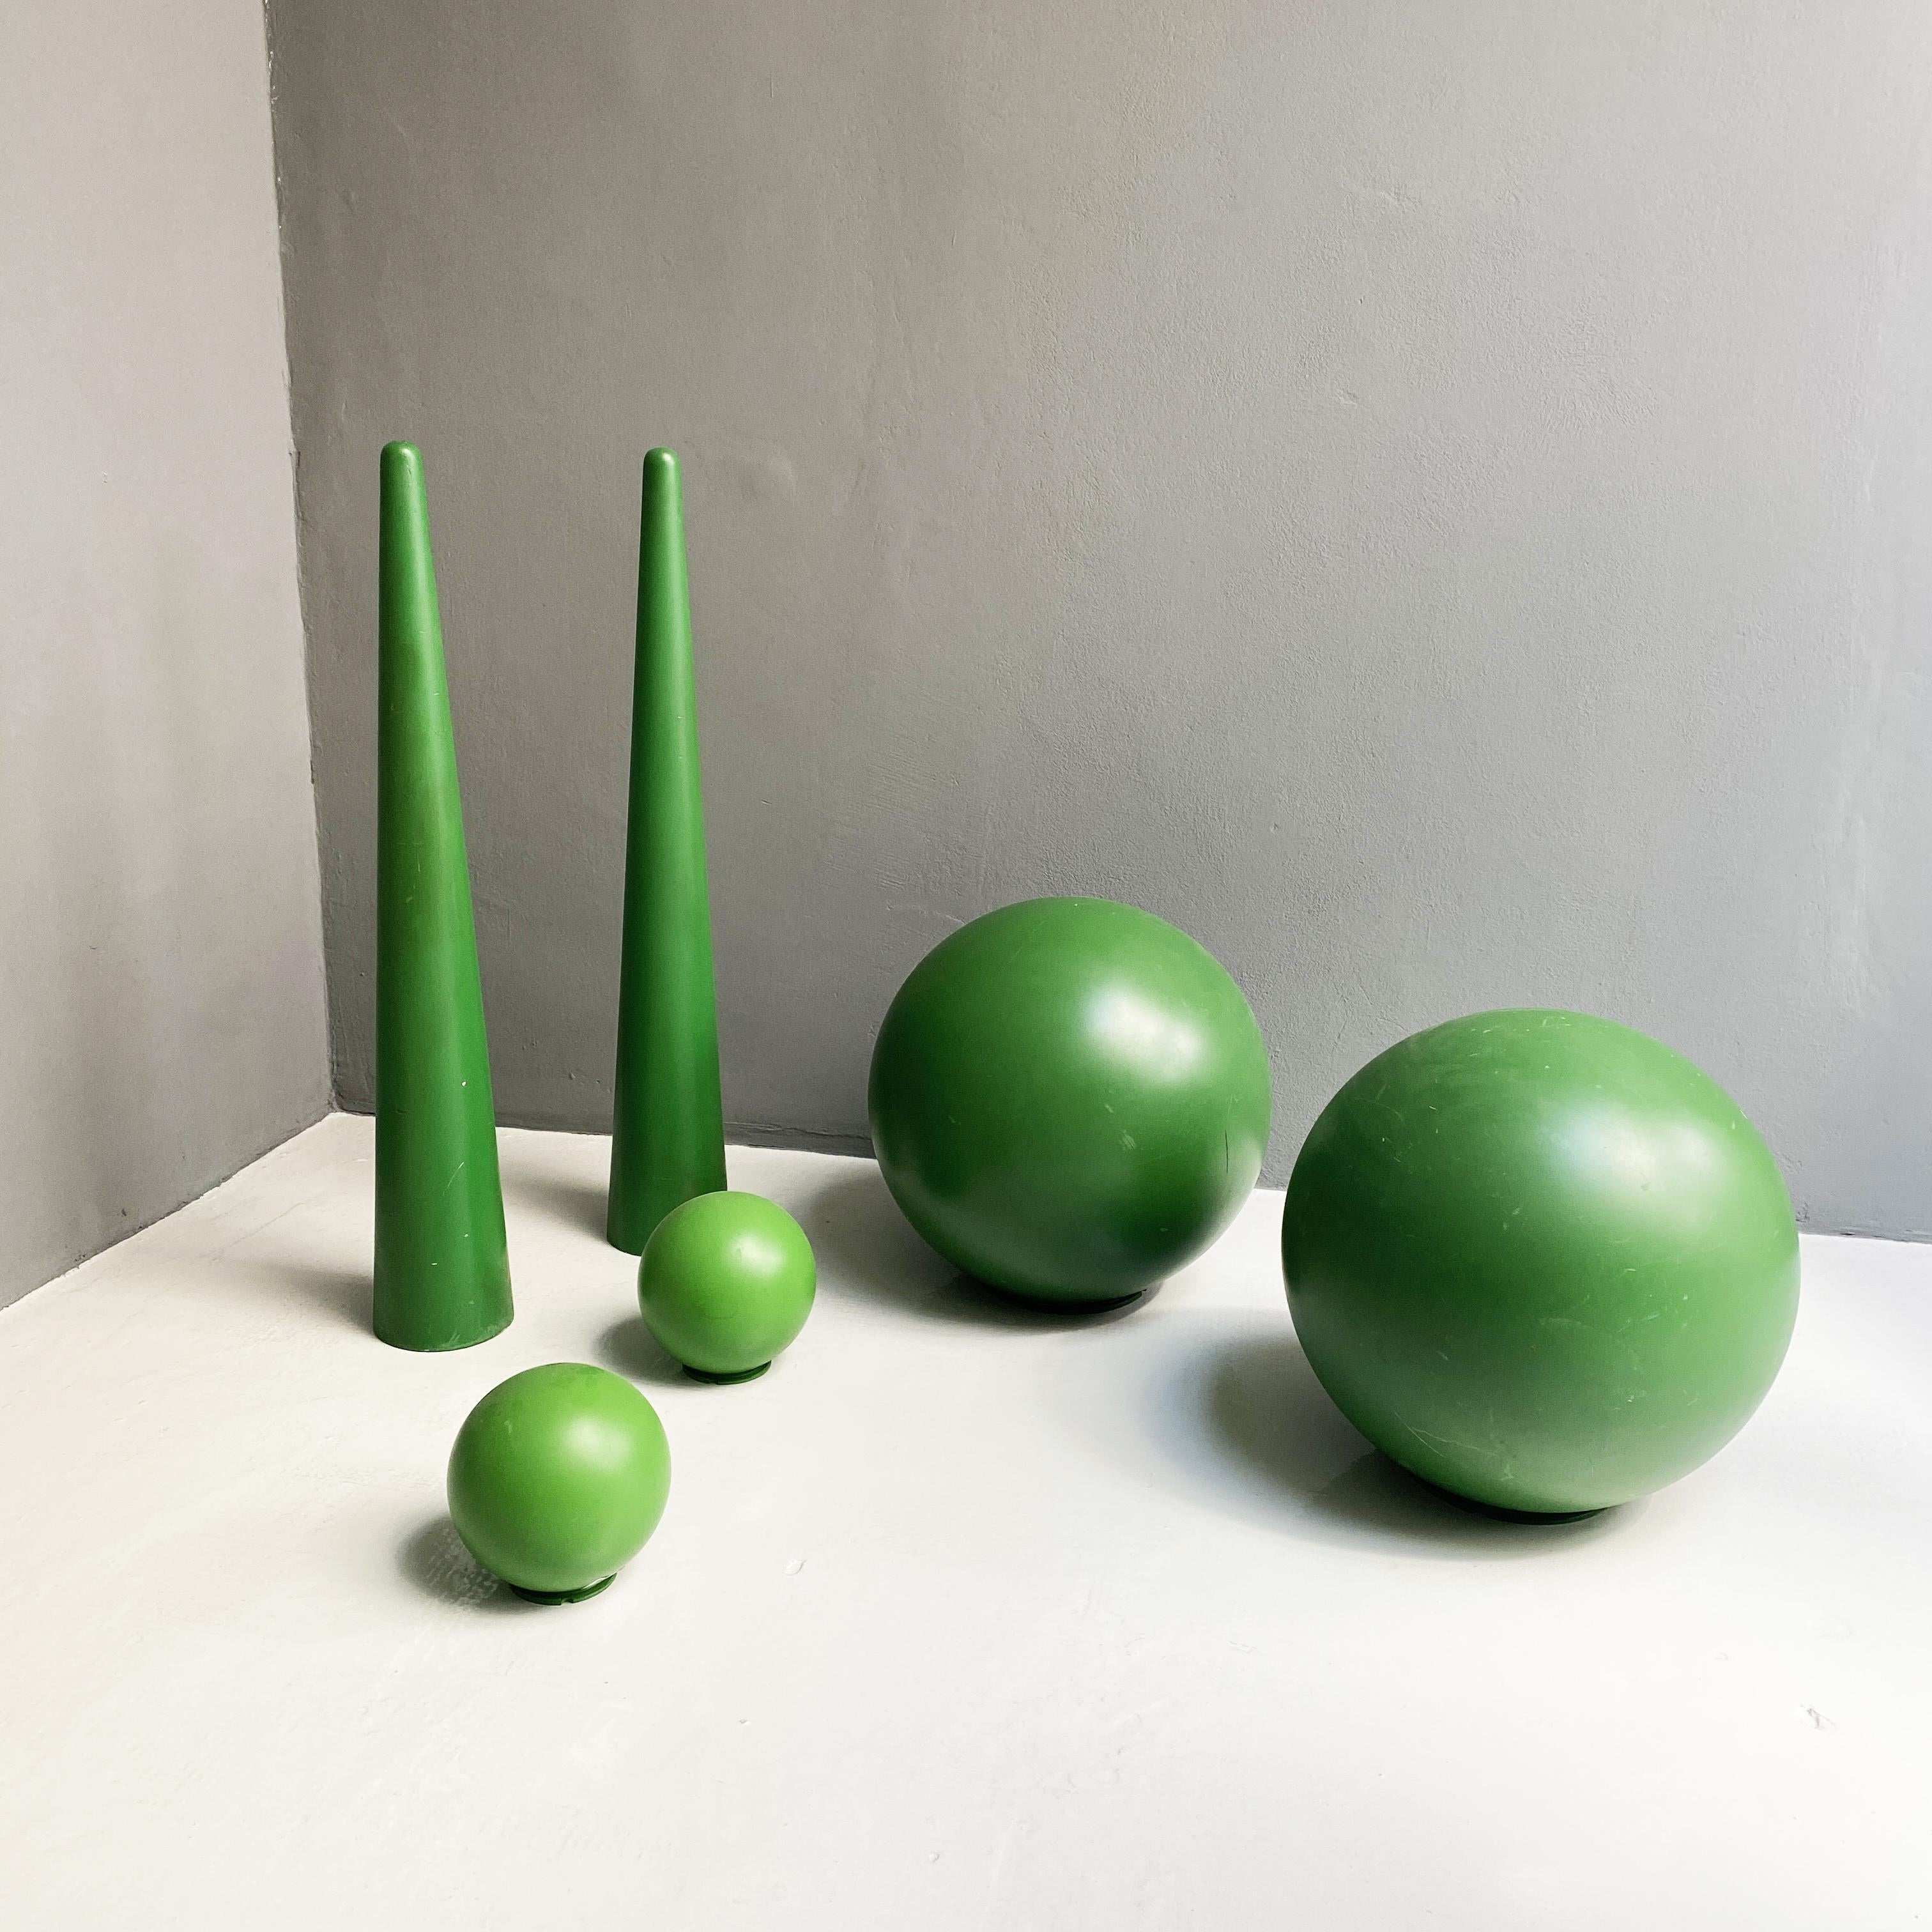 Italian Modern Green Plastic Props for Scenography, 1990s For Sale 5